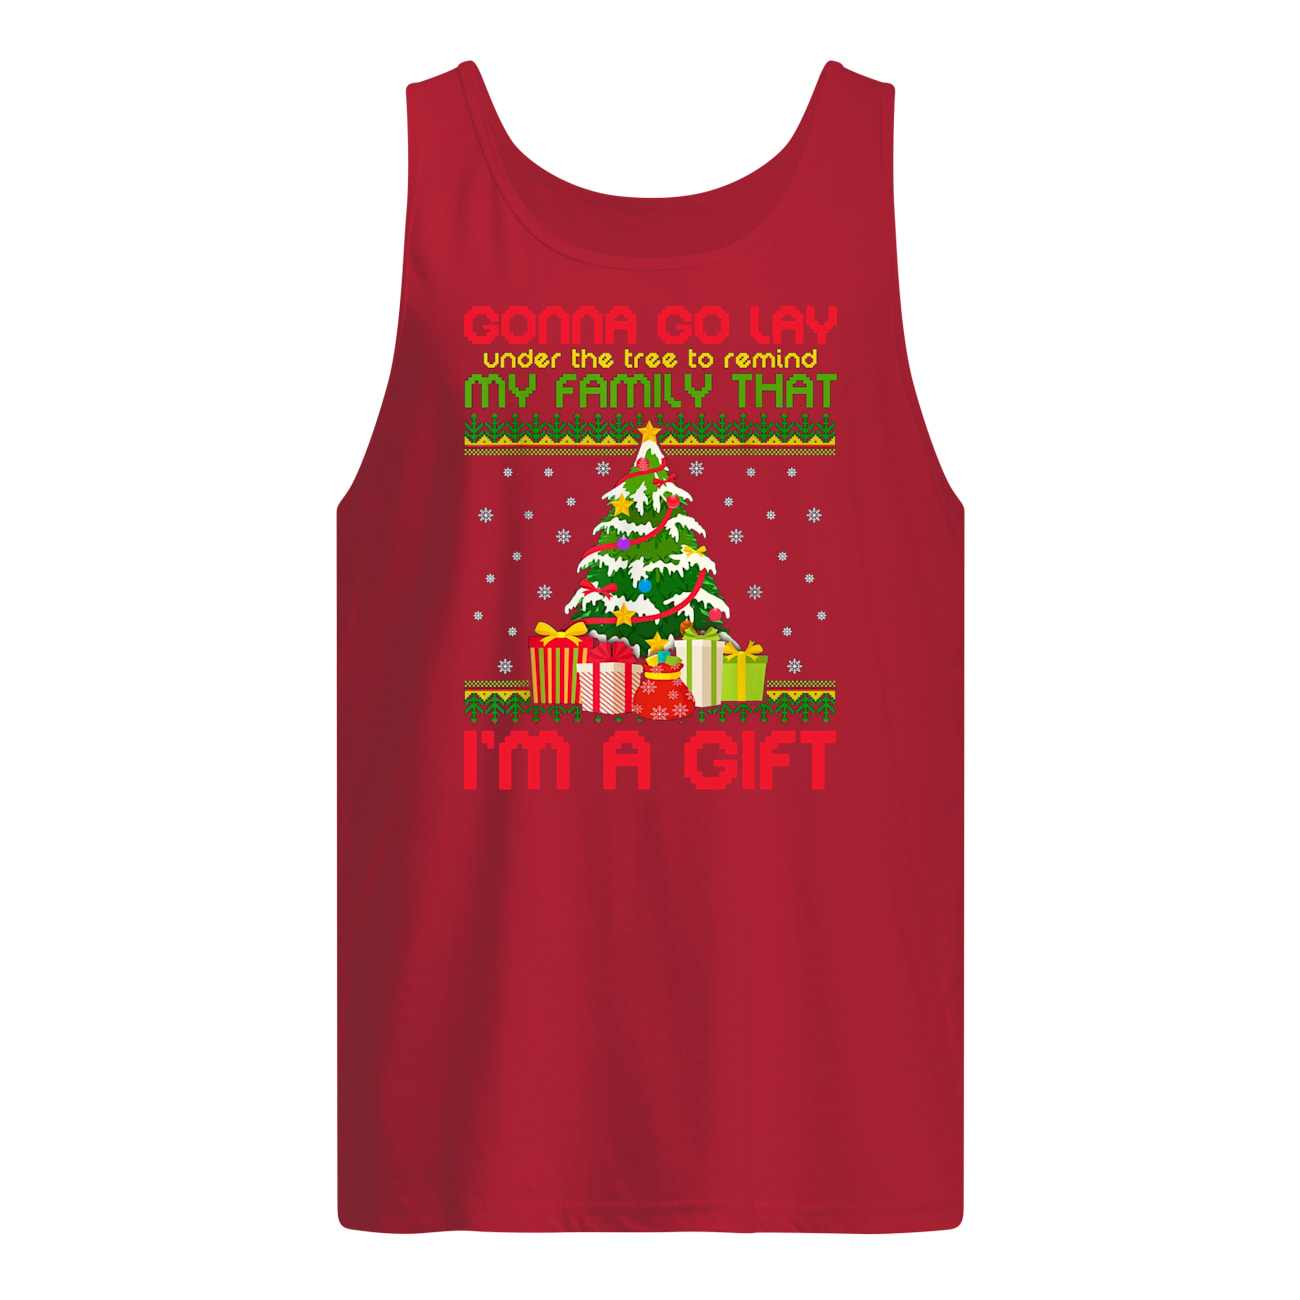 Gonna go lay under the tree to remind my family that i'm a gift ugly christmas tank top